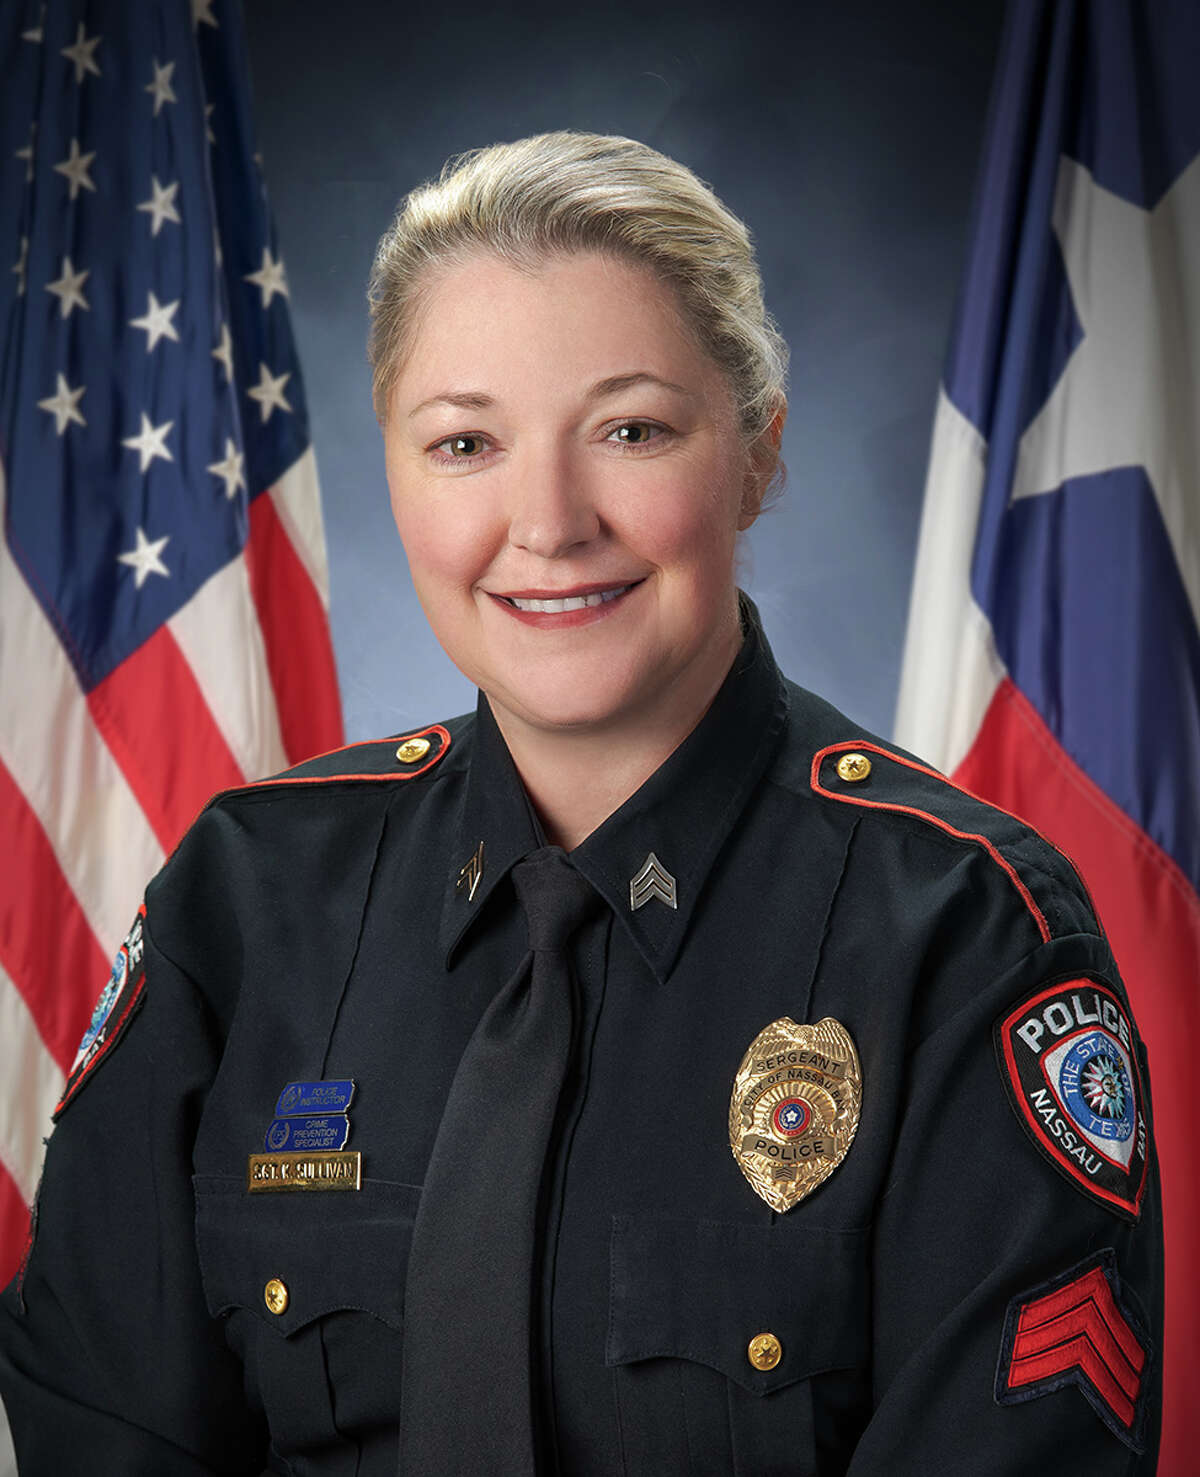 Sgt. Kaila Sullivan was forty-three years old and a resident of Friendswood, Texas. December 27th would have been her 16th anniversary with the City of Nassau Bay Police Department.